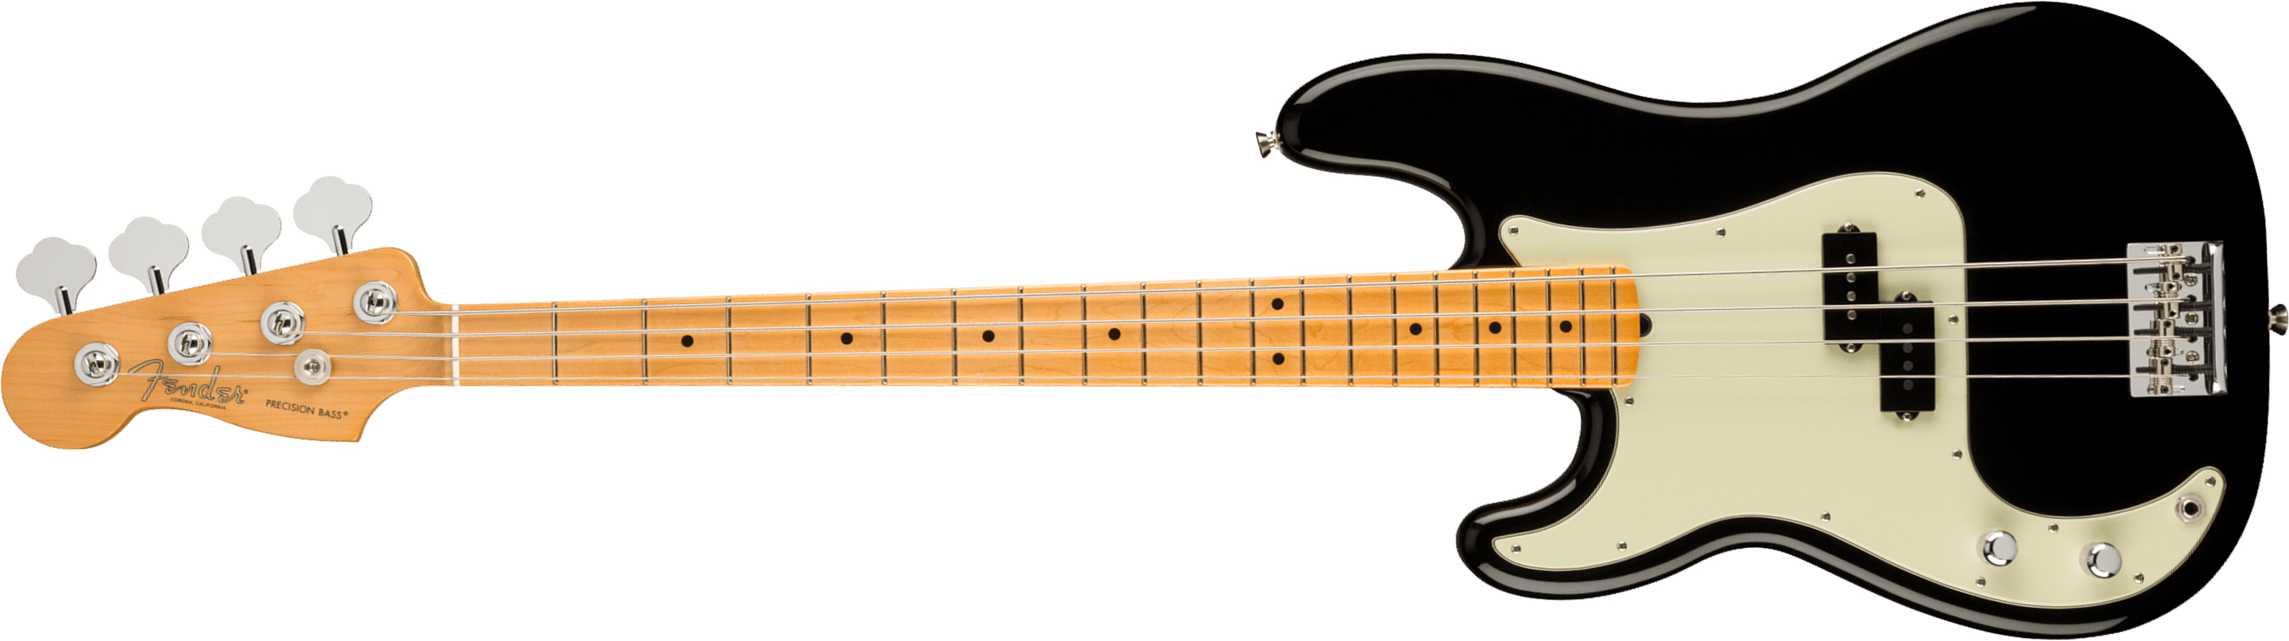 Fender Precision Bass American Professional Ii Lh Gaucher Usa Mn - Black - Basse Électrique Solid Body - Main picture